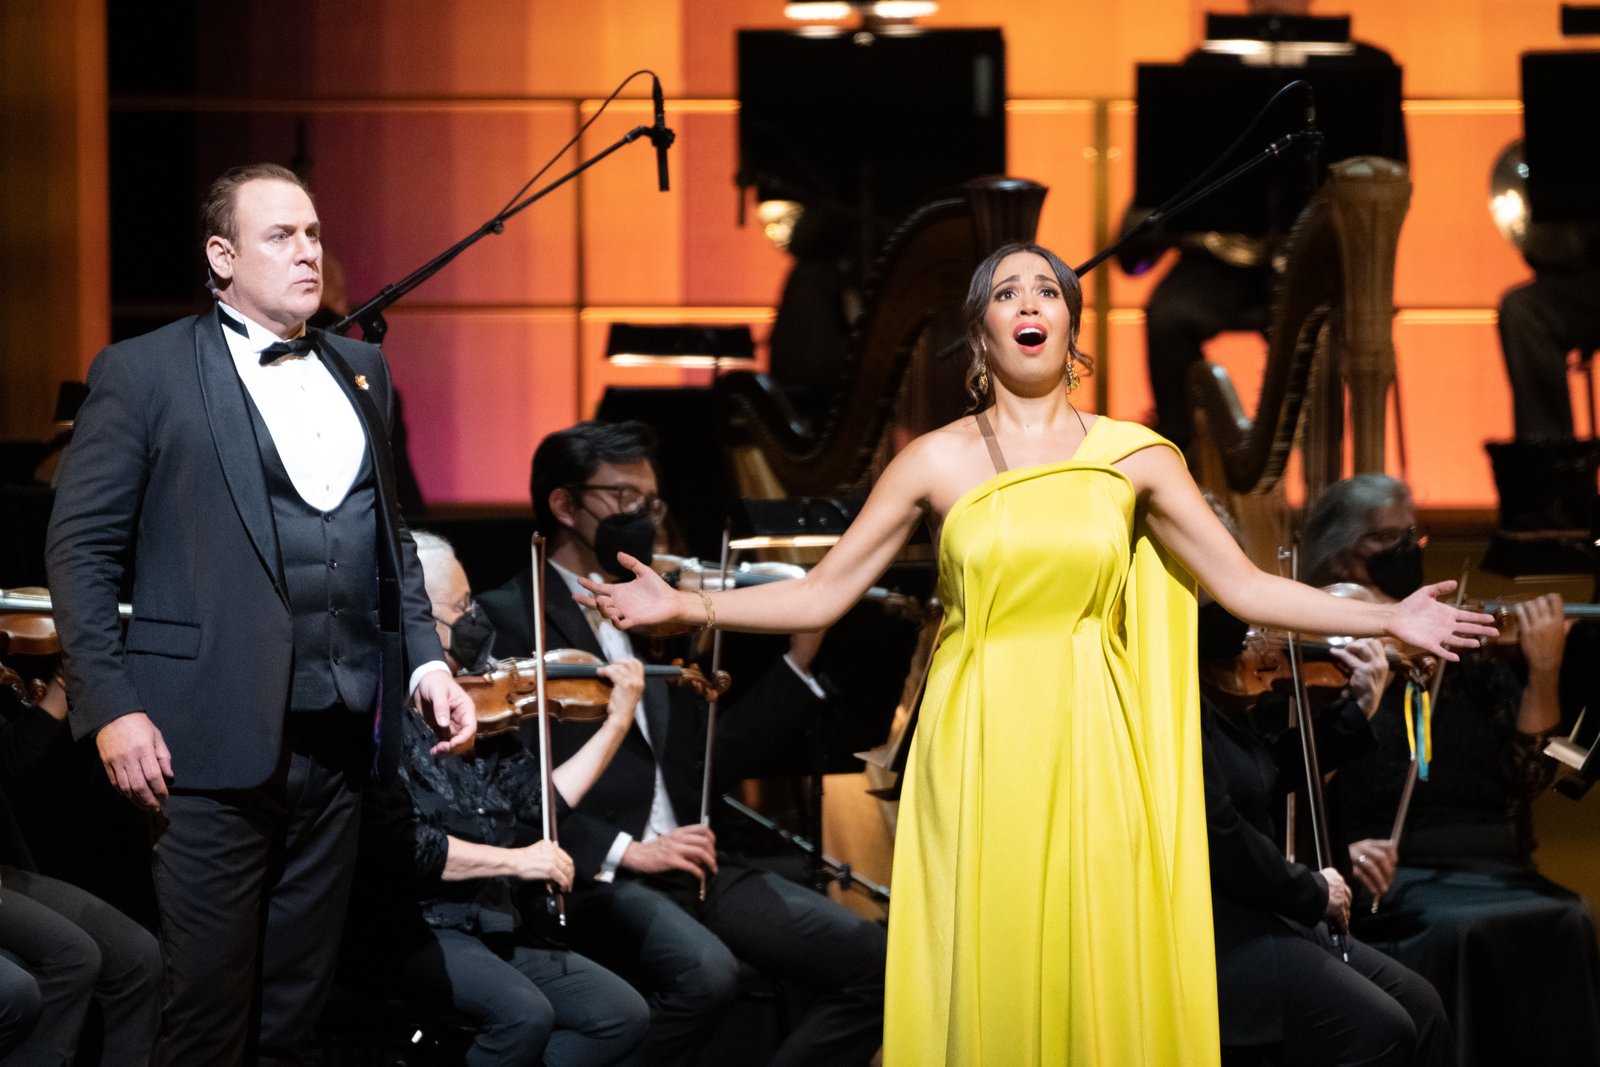 100 Years San Francisco Opera Celebrates the first One Hundred Years with a Festive Opening Night Celebration